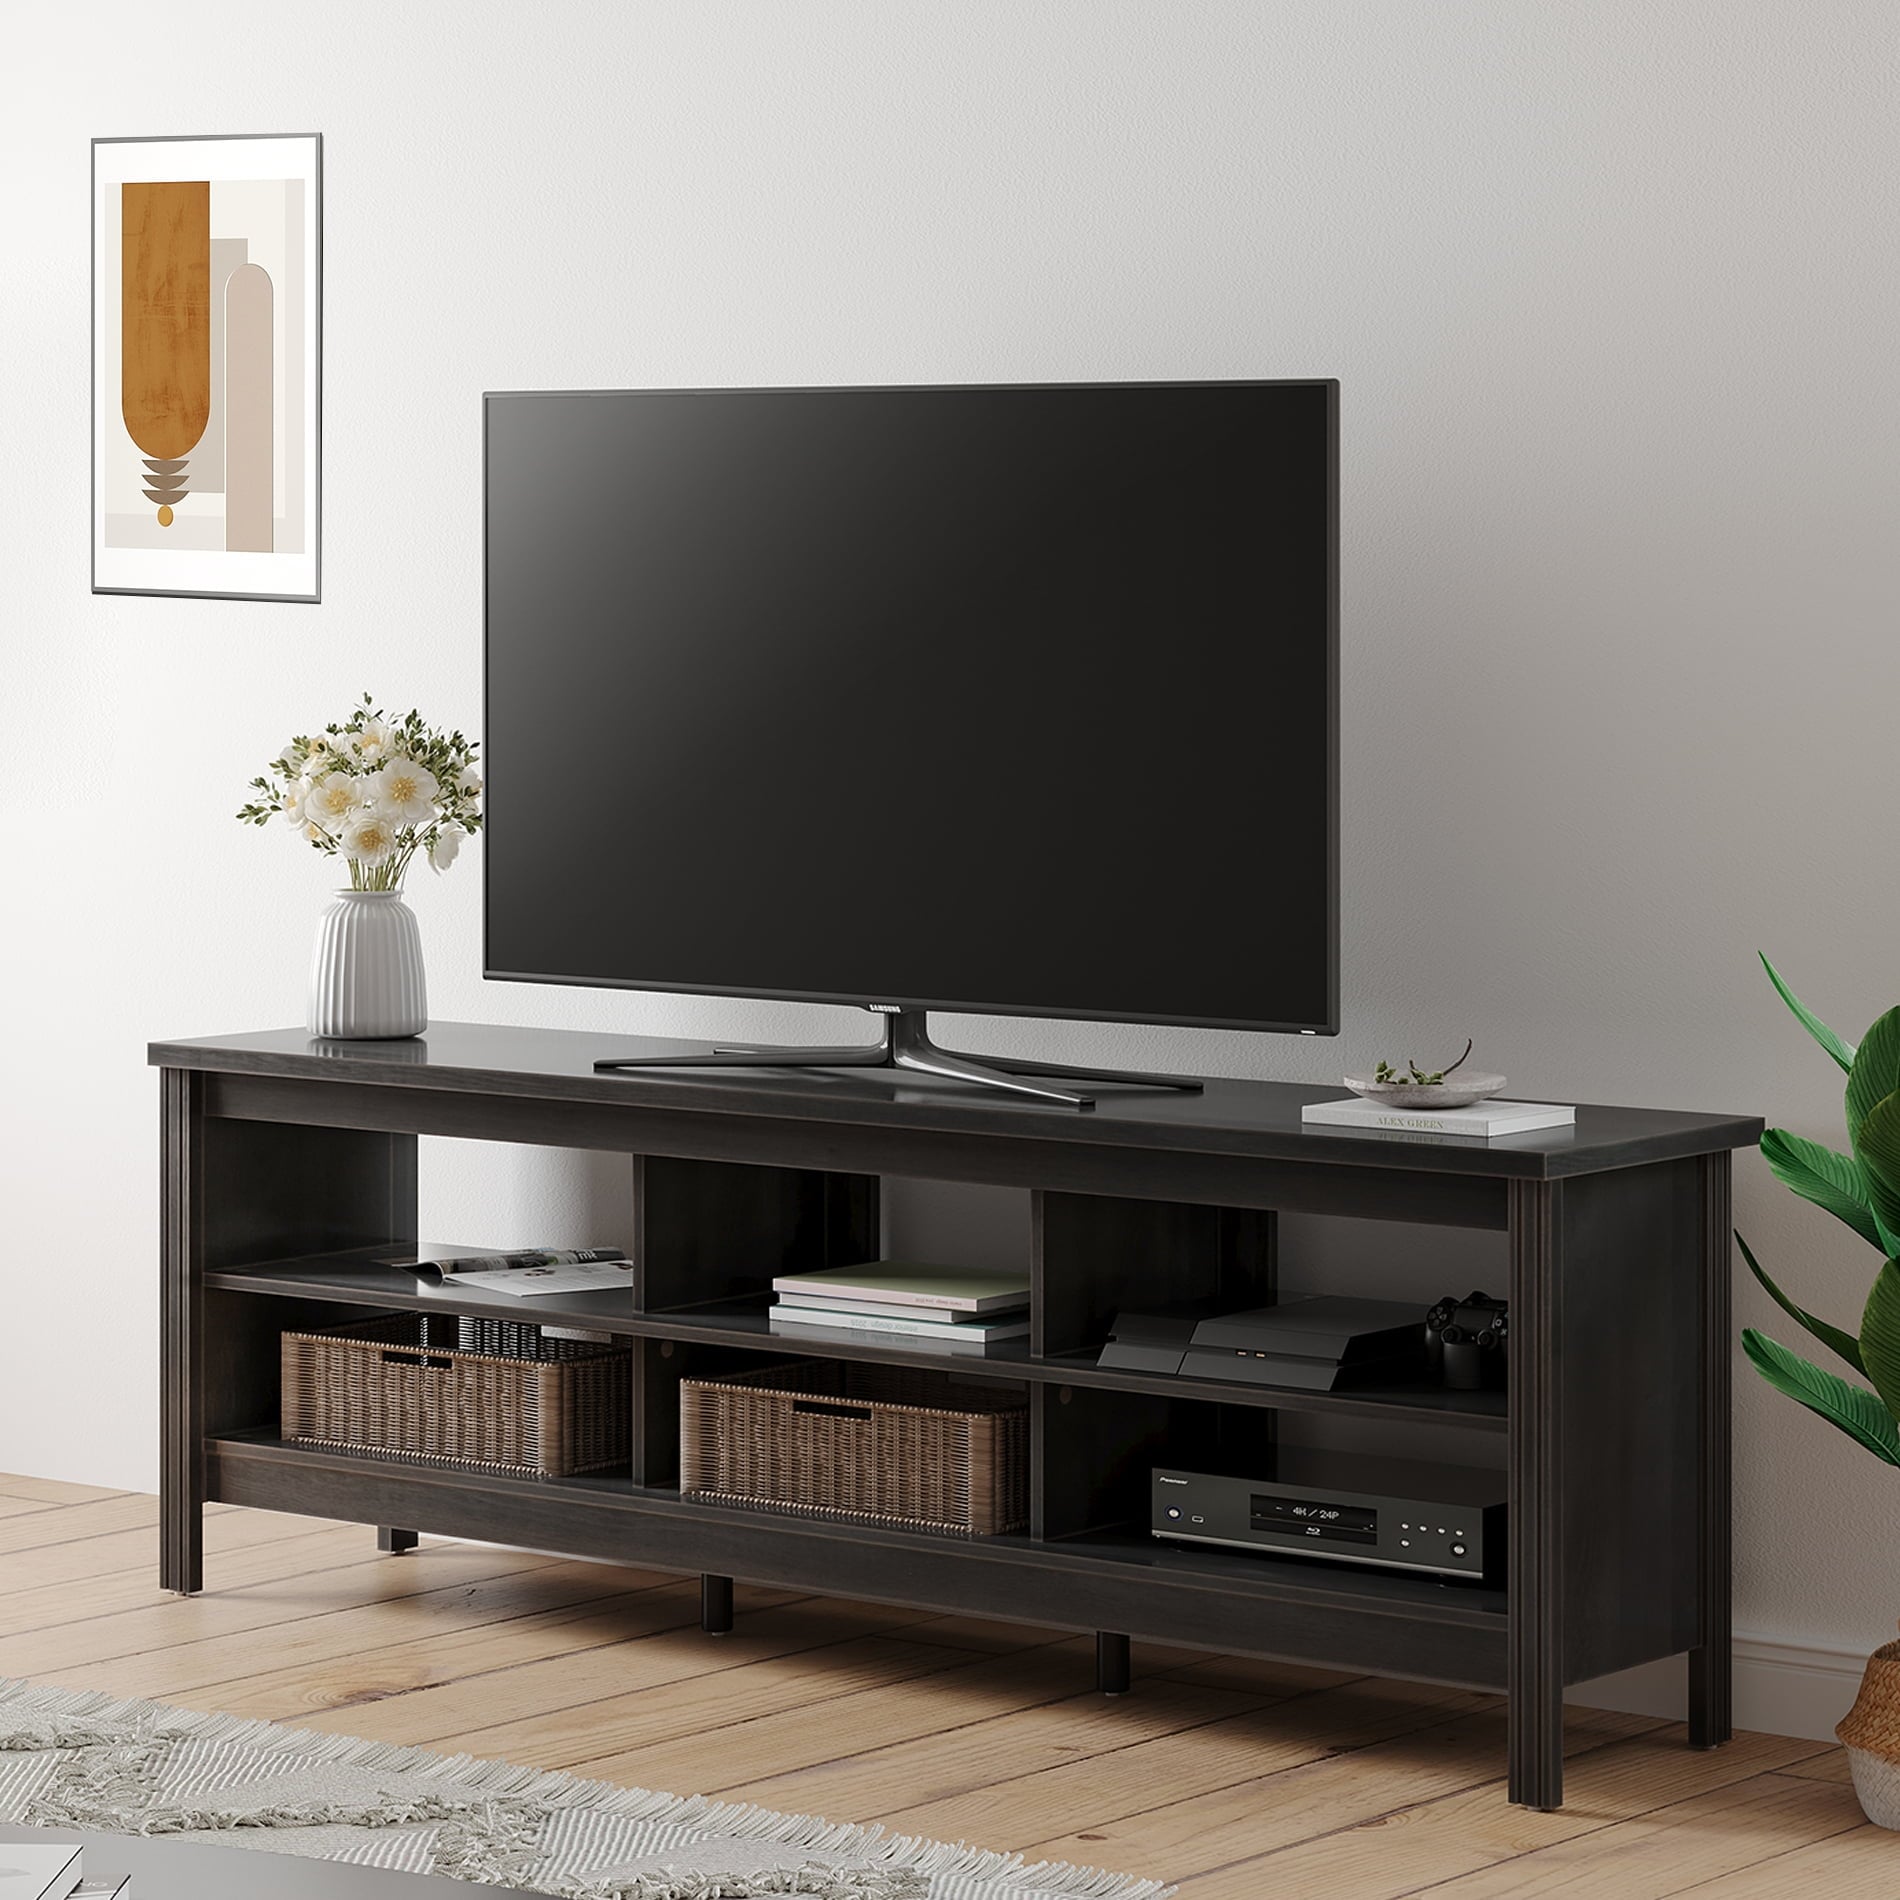 EPOWP TV Stand for 75 inch TV Wood Media Console Cabinet, Black TV Entertainment Center for Living Room, 70 inch